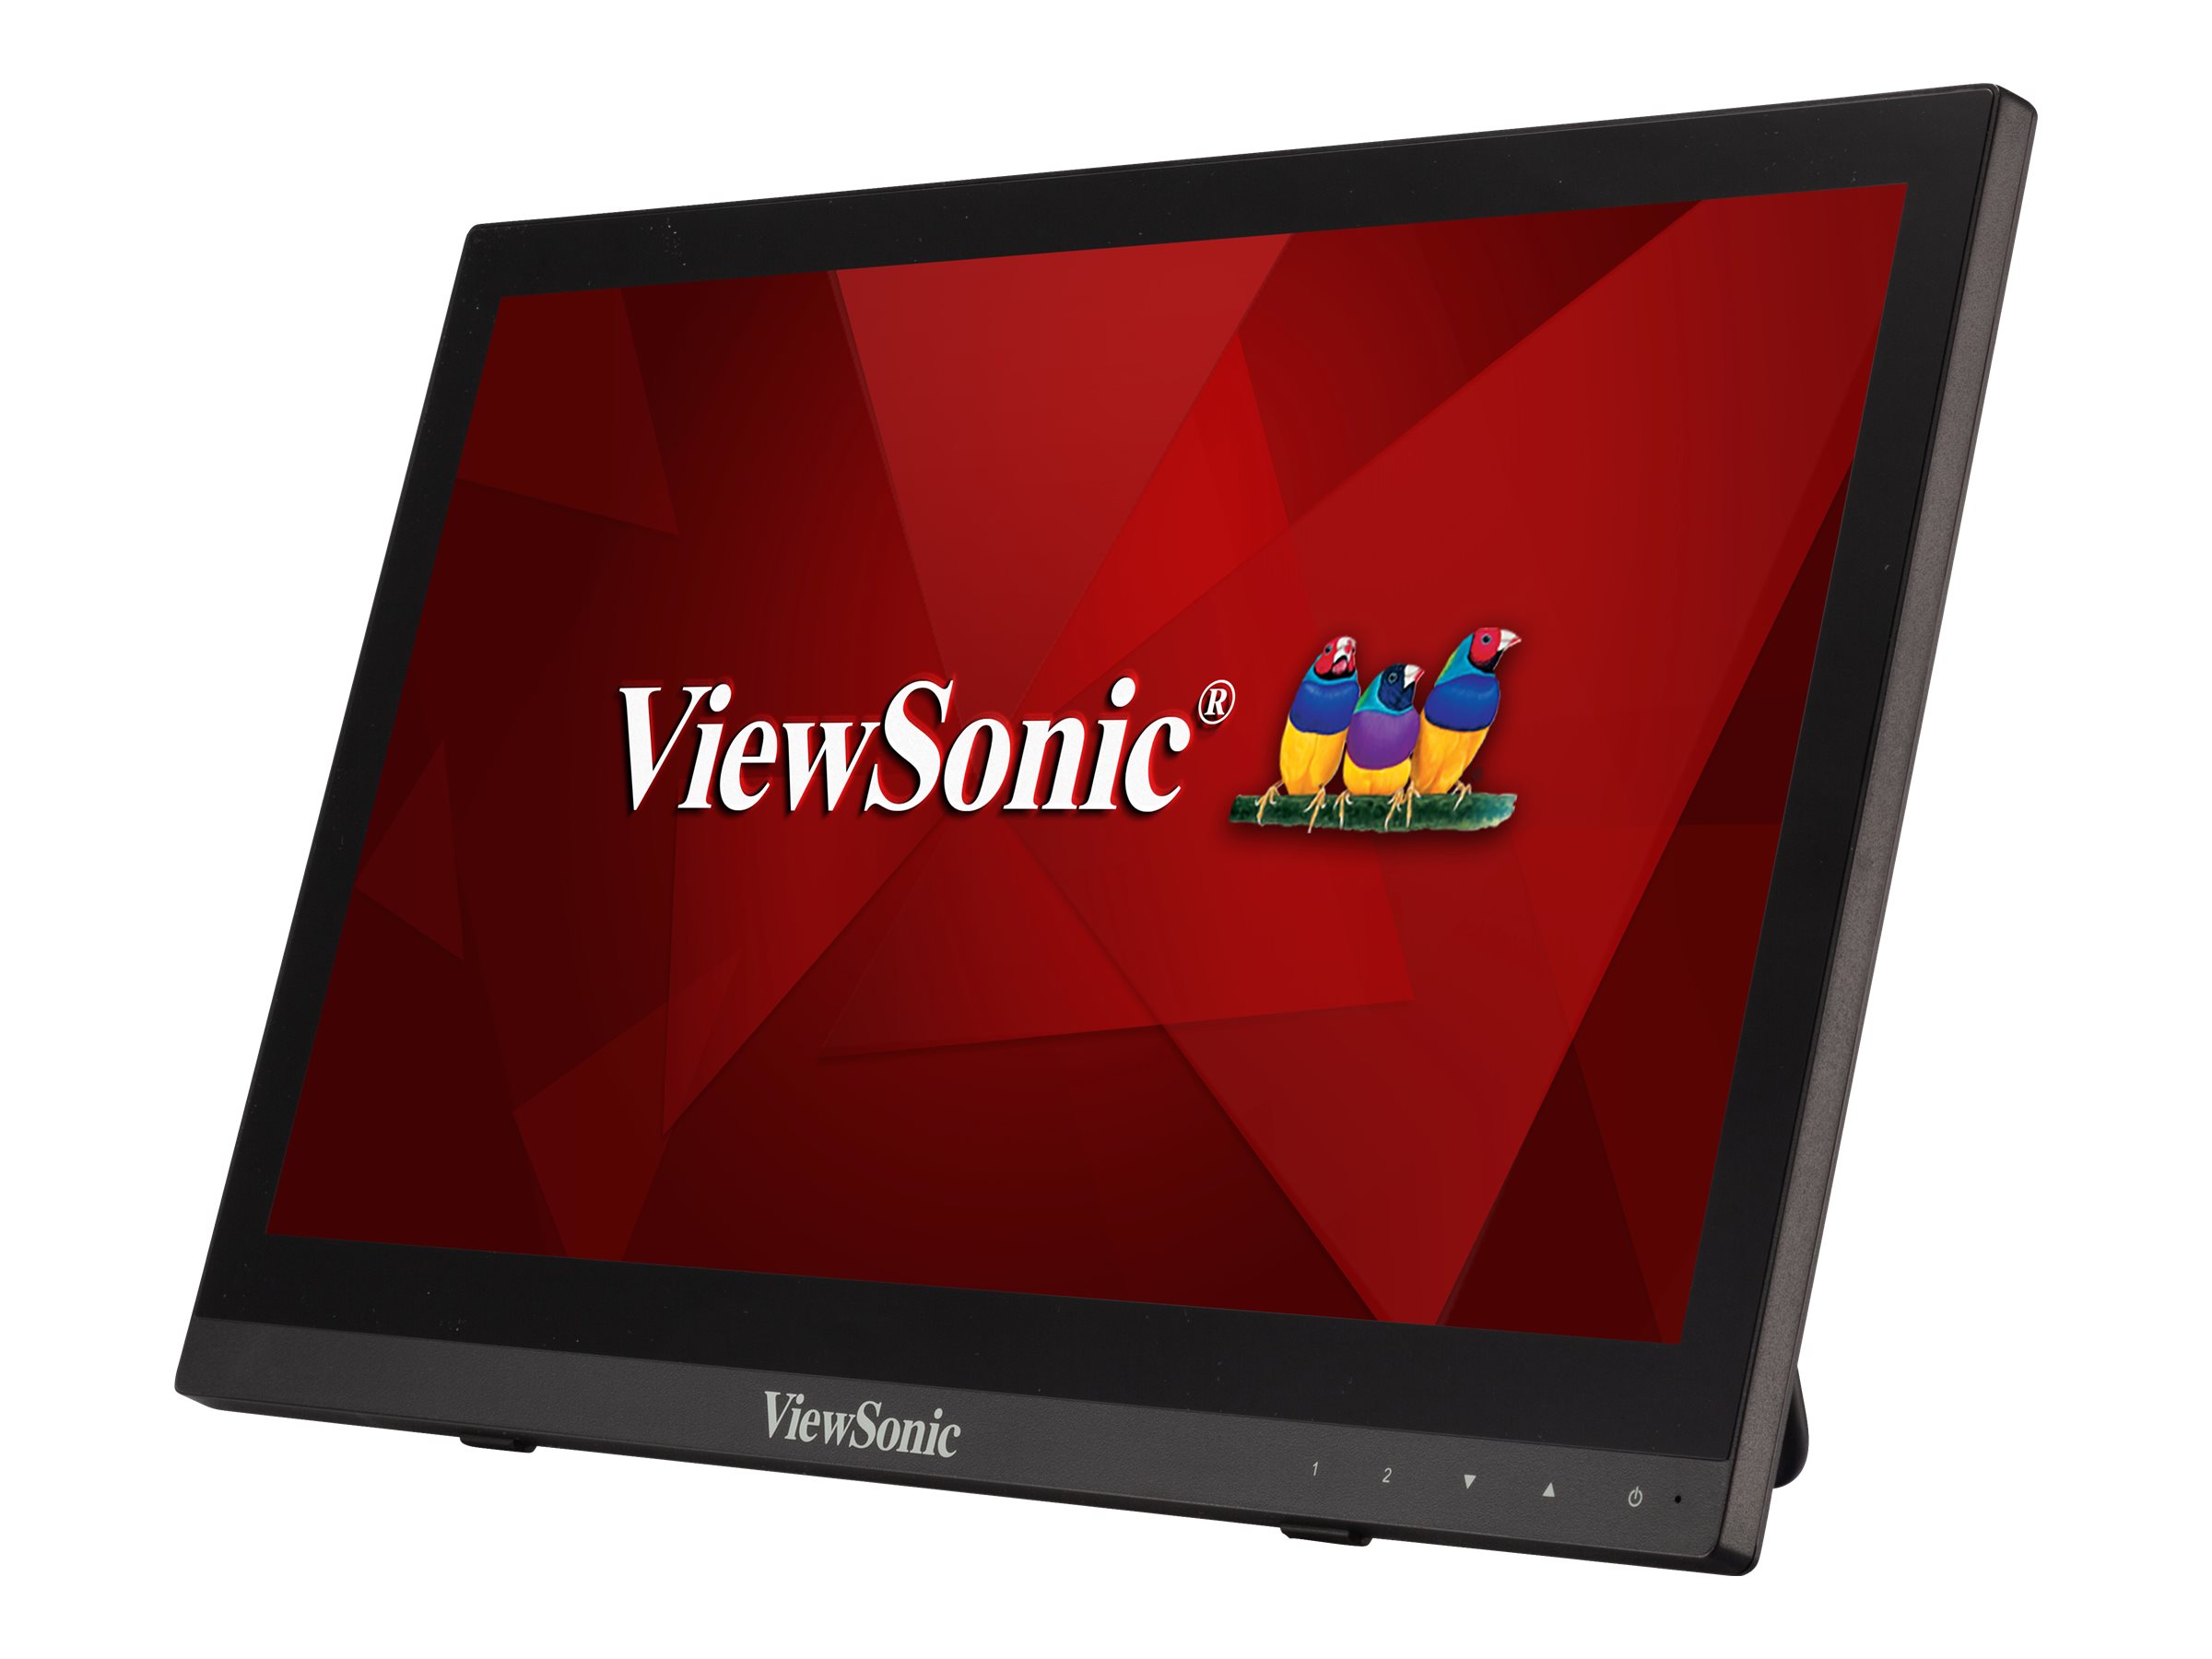 VIEWSONIC TD1630-3 39,6cm 16Zoll 1366x768 10-Punkt Multitouch 190 nits VGA HDMI speakers bookstand style